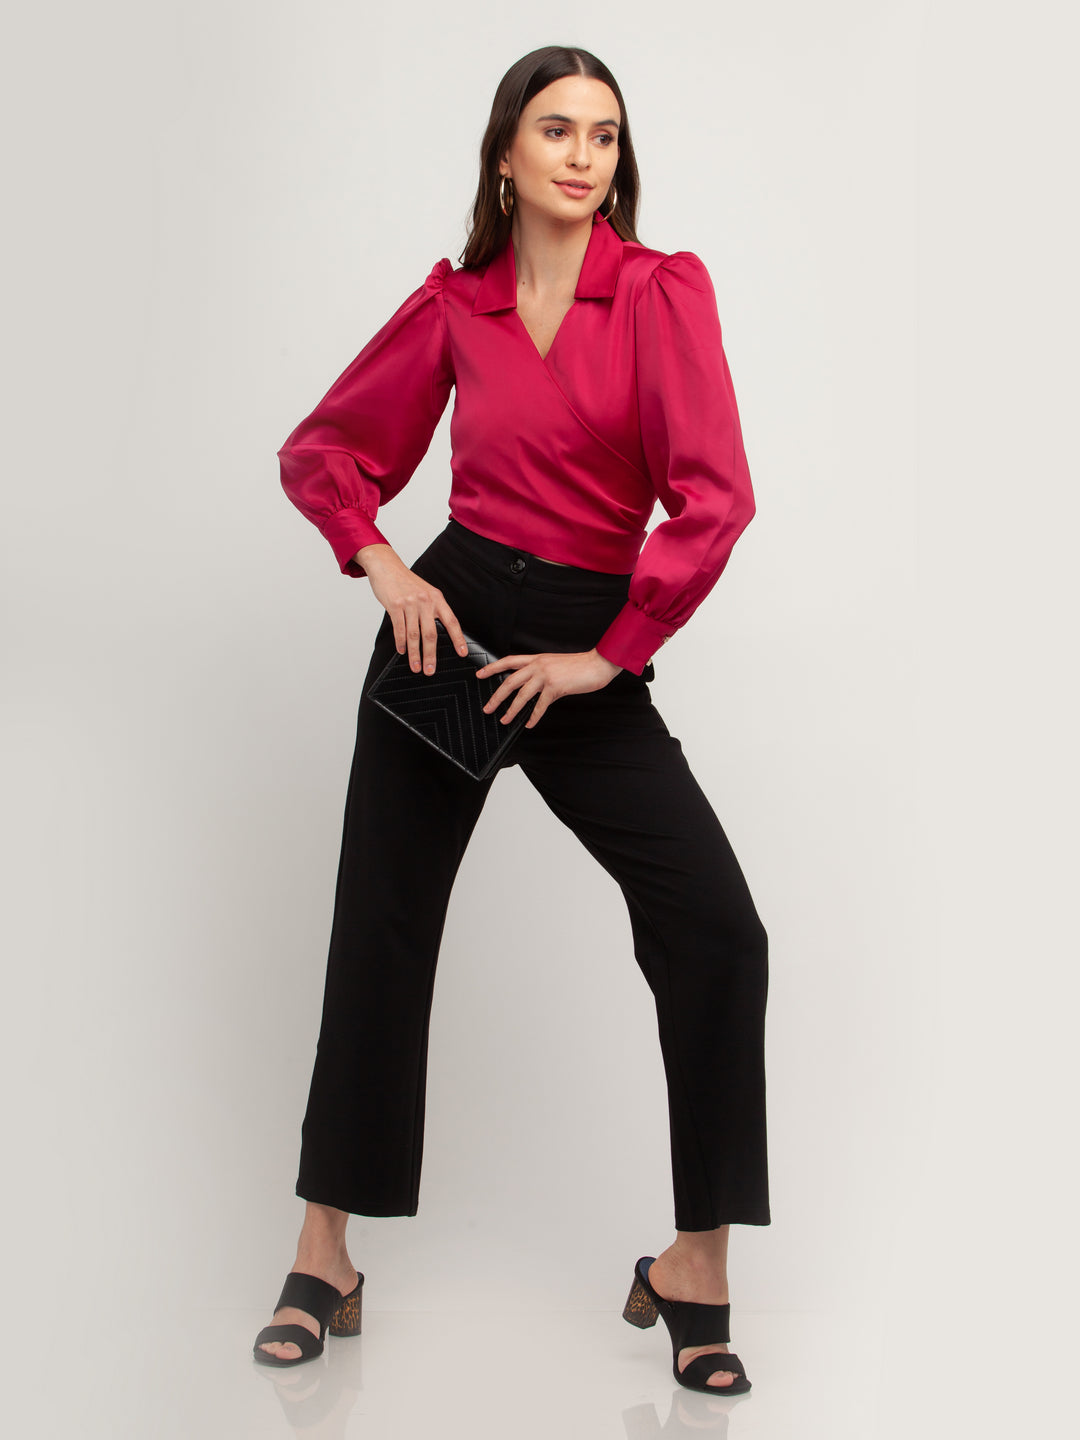 Pink Solid Tie-Up Shirt For Women